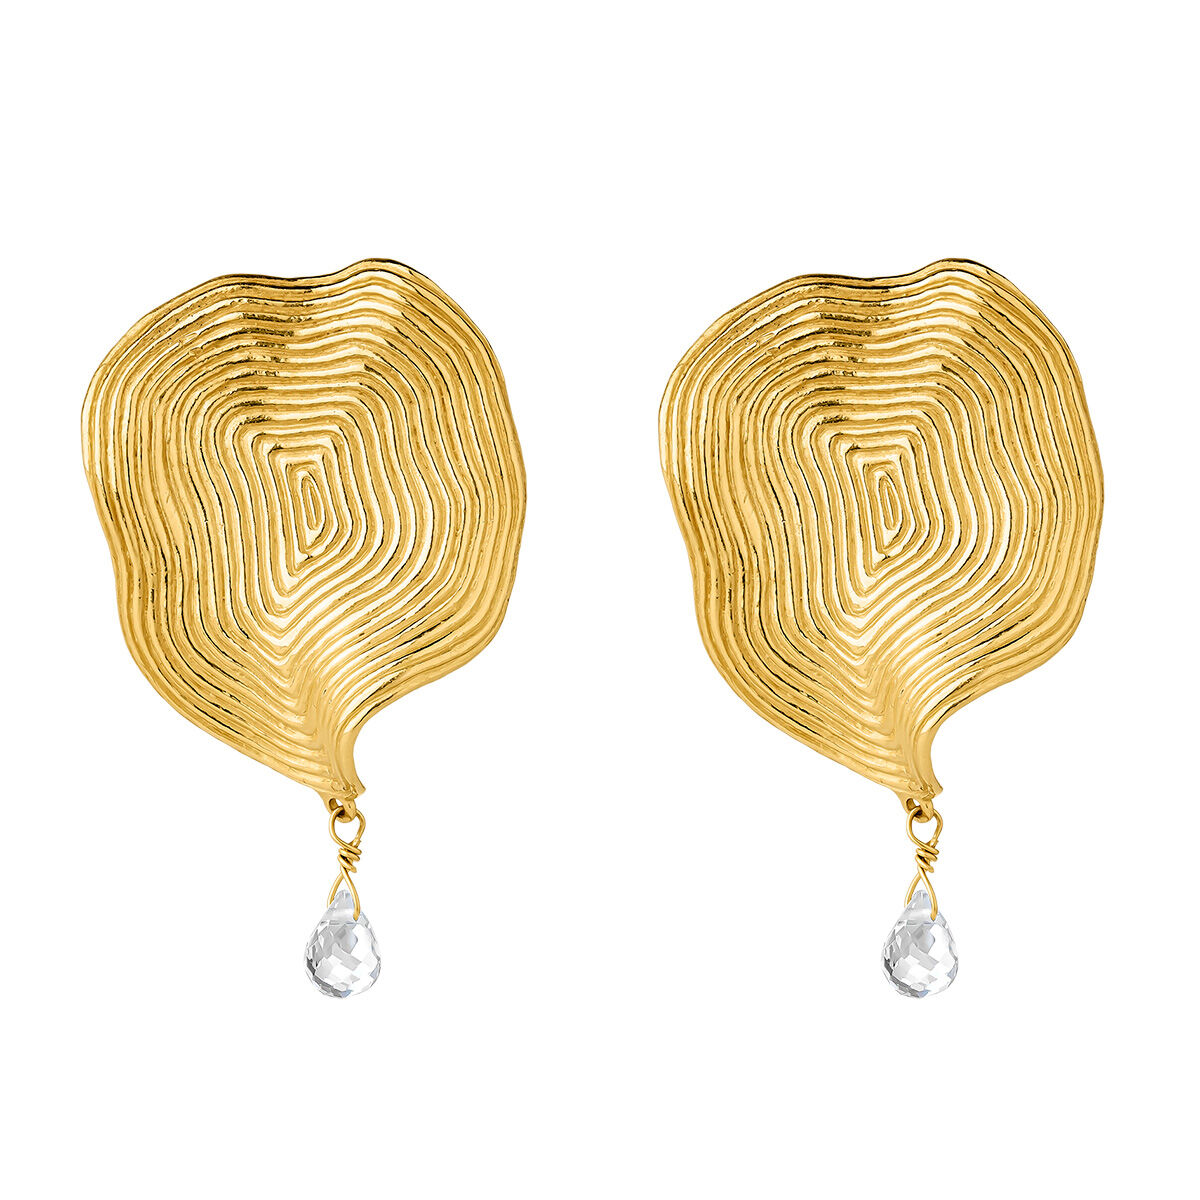 Large-size, embossed earrings in 18kt yellow gold-plated silver with white topaz, J05215-02-WT, hi-res